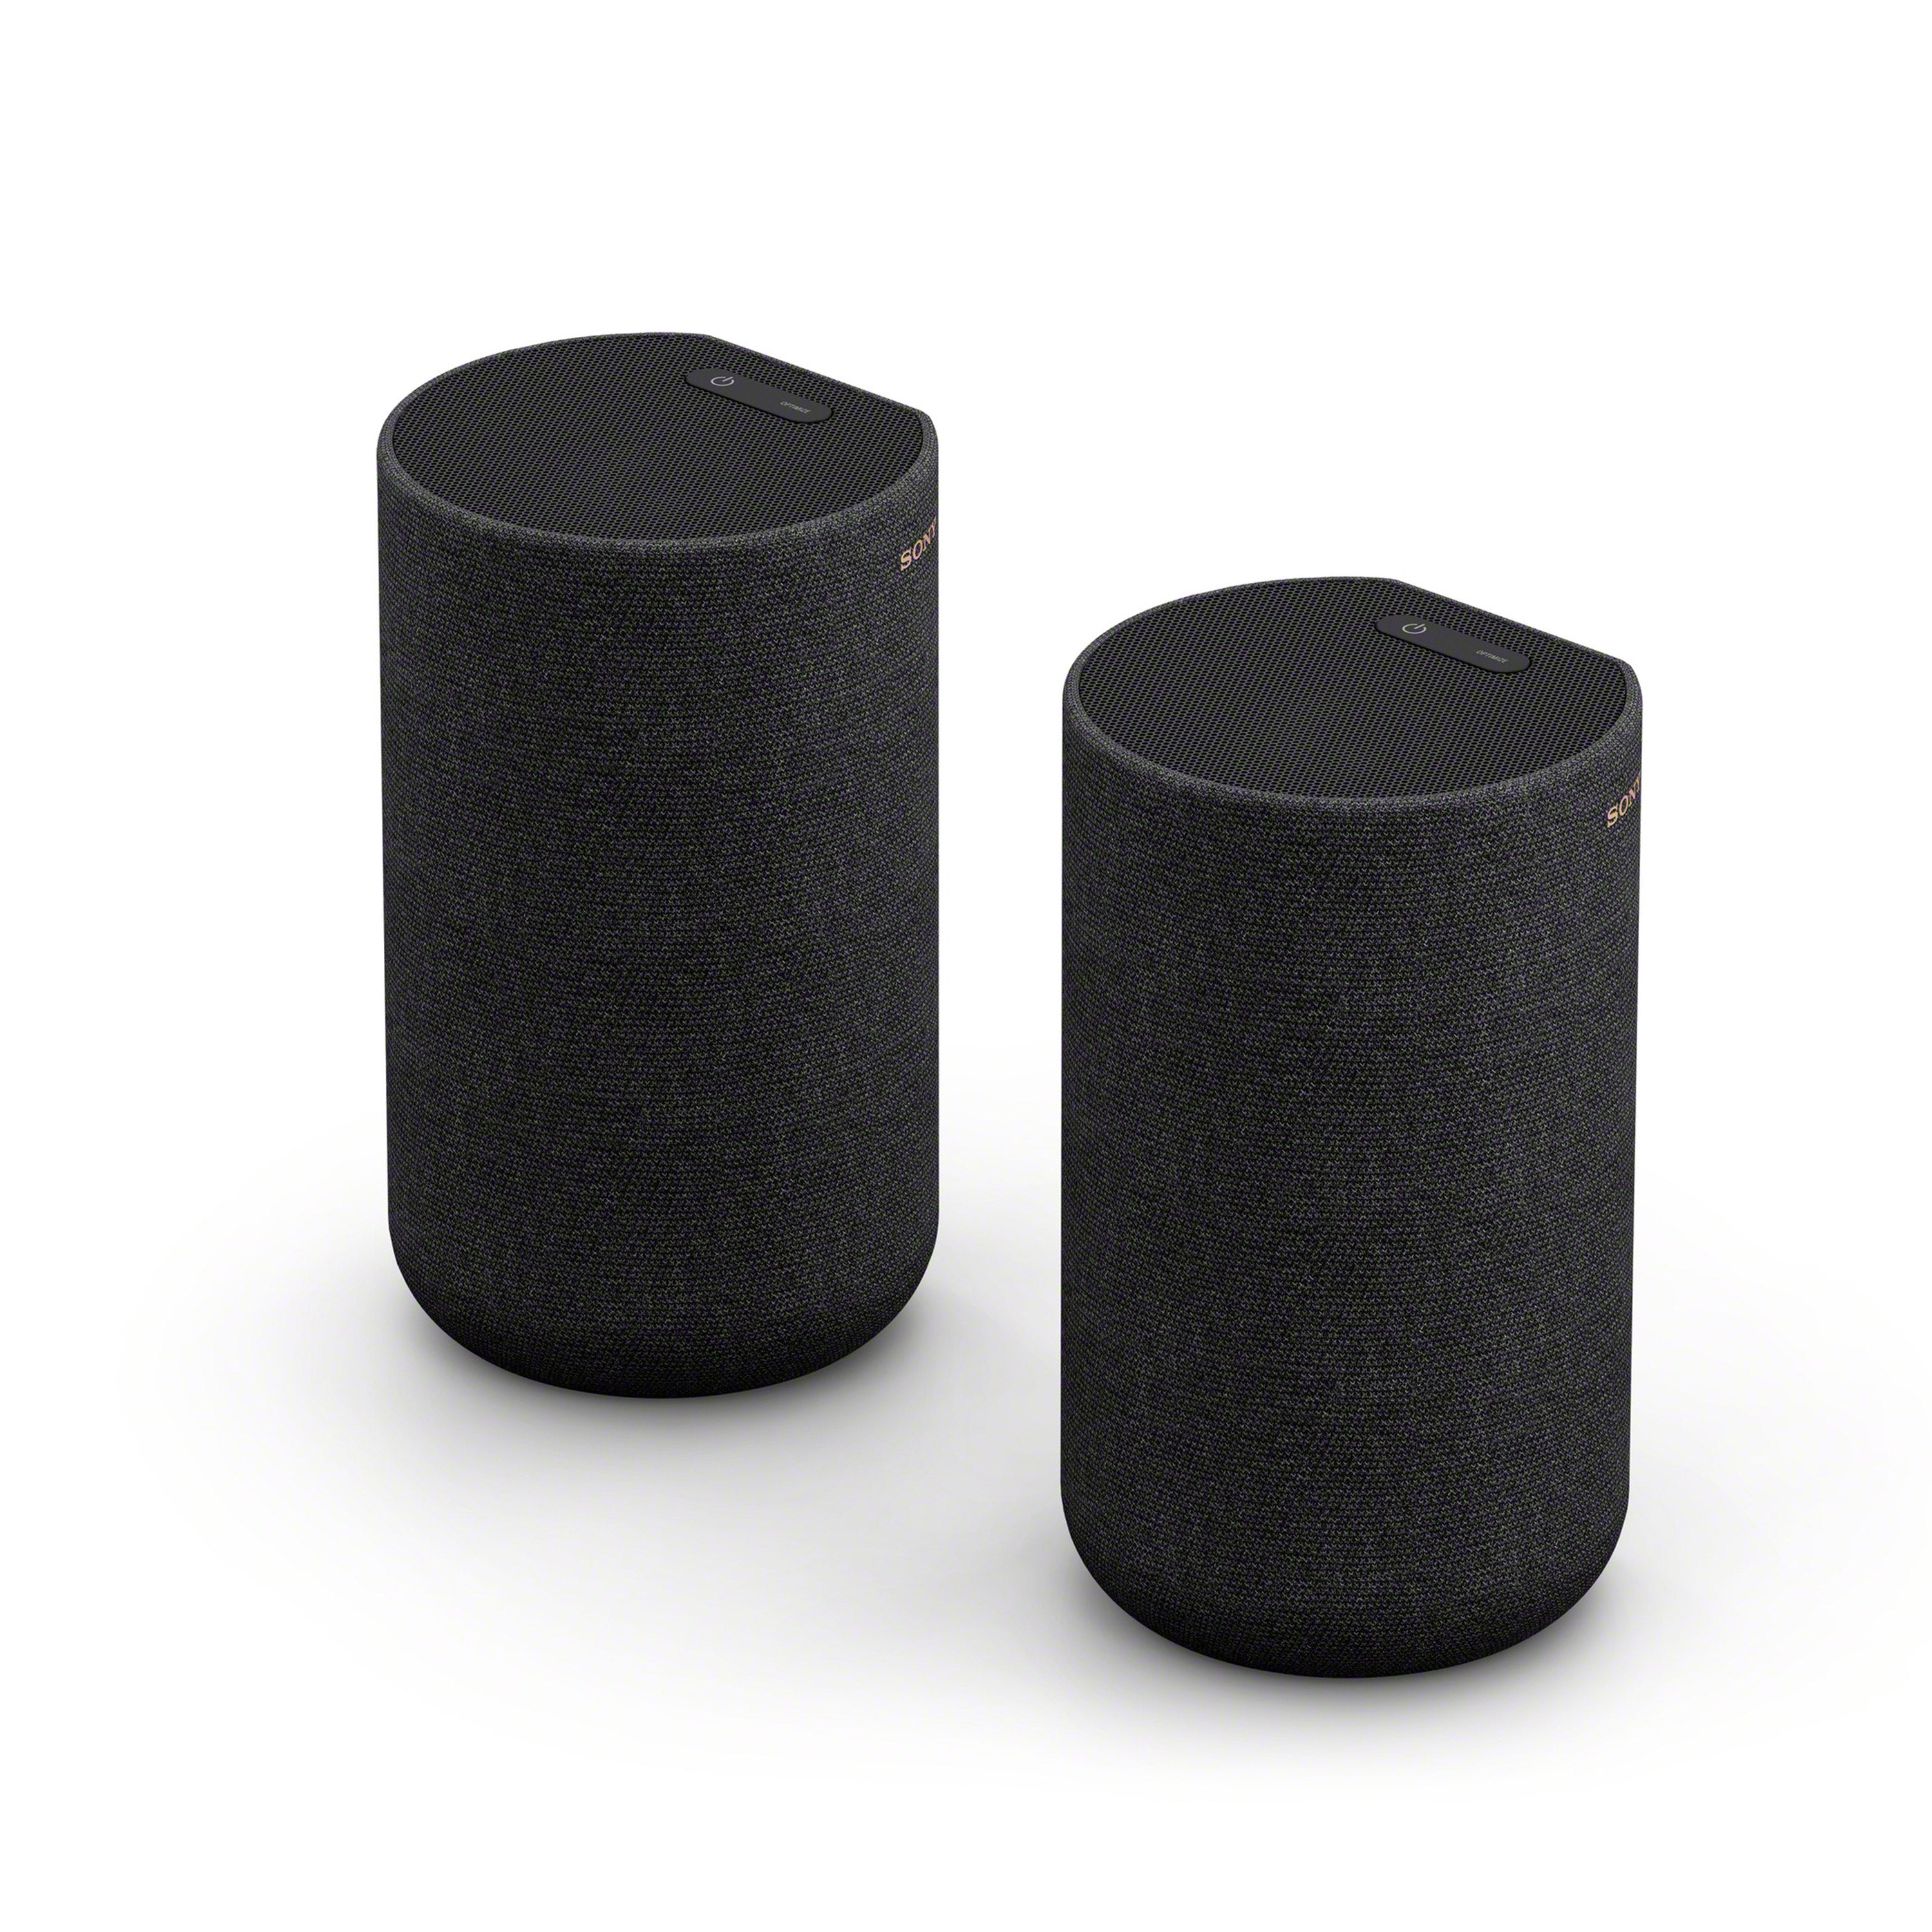 Sony SA-RS5 Wireless Rear Speakers with Built-in Battery for HT-A7000/HT-A500